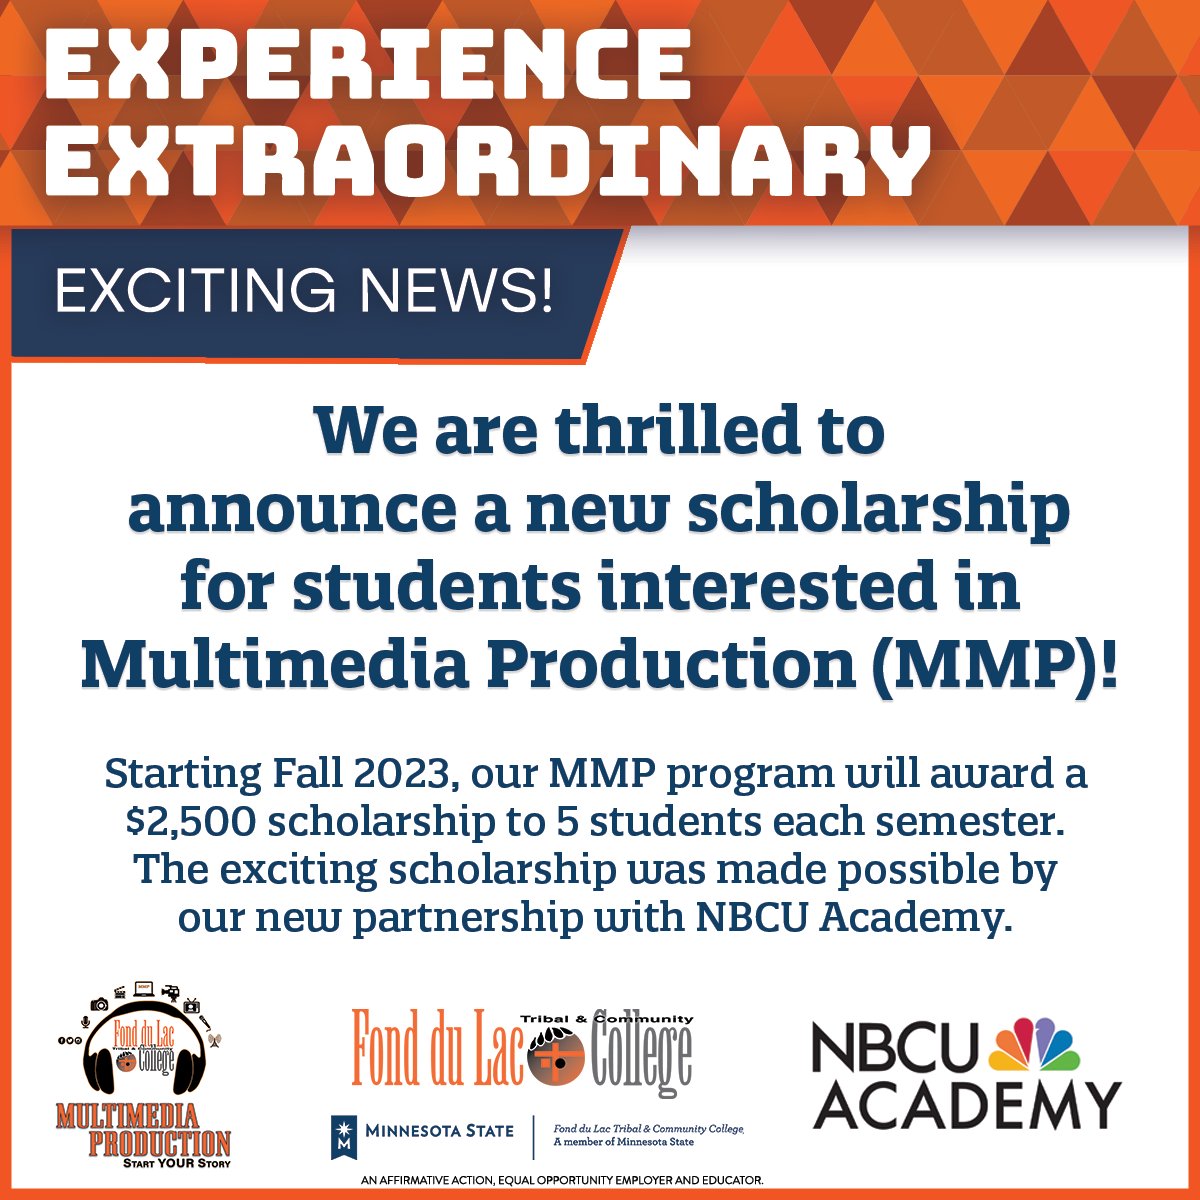 We are thrilled to announce a new scholarship for students interested in #MultimediaProduction (MMP)! Starting this fall, our MMP program will award a $2,500 scholarship to 5 students each semester. The #scholarship was made possible by our new partnership with @NBCUAcademy.